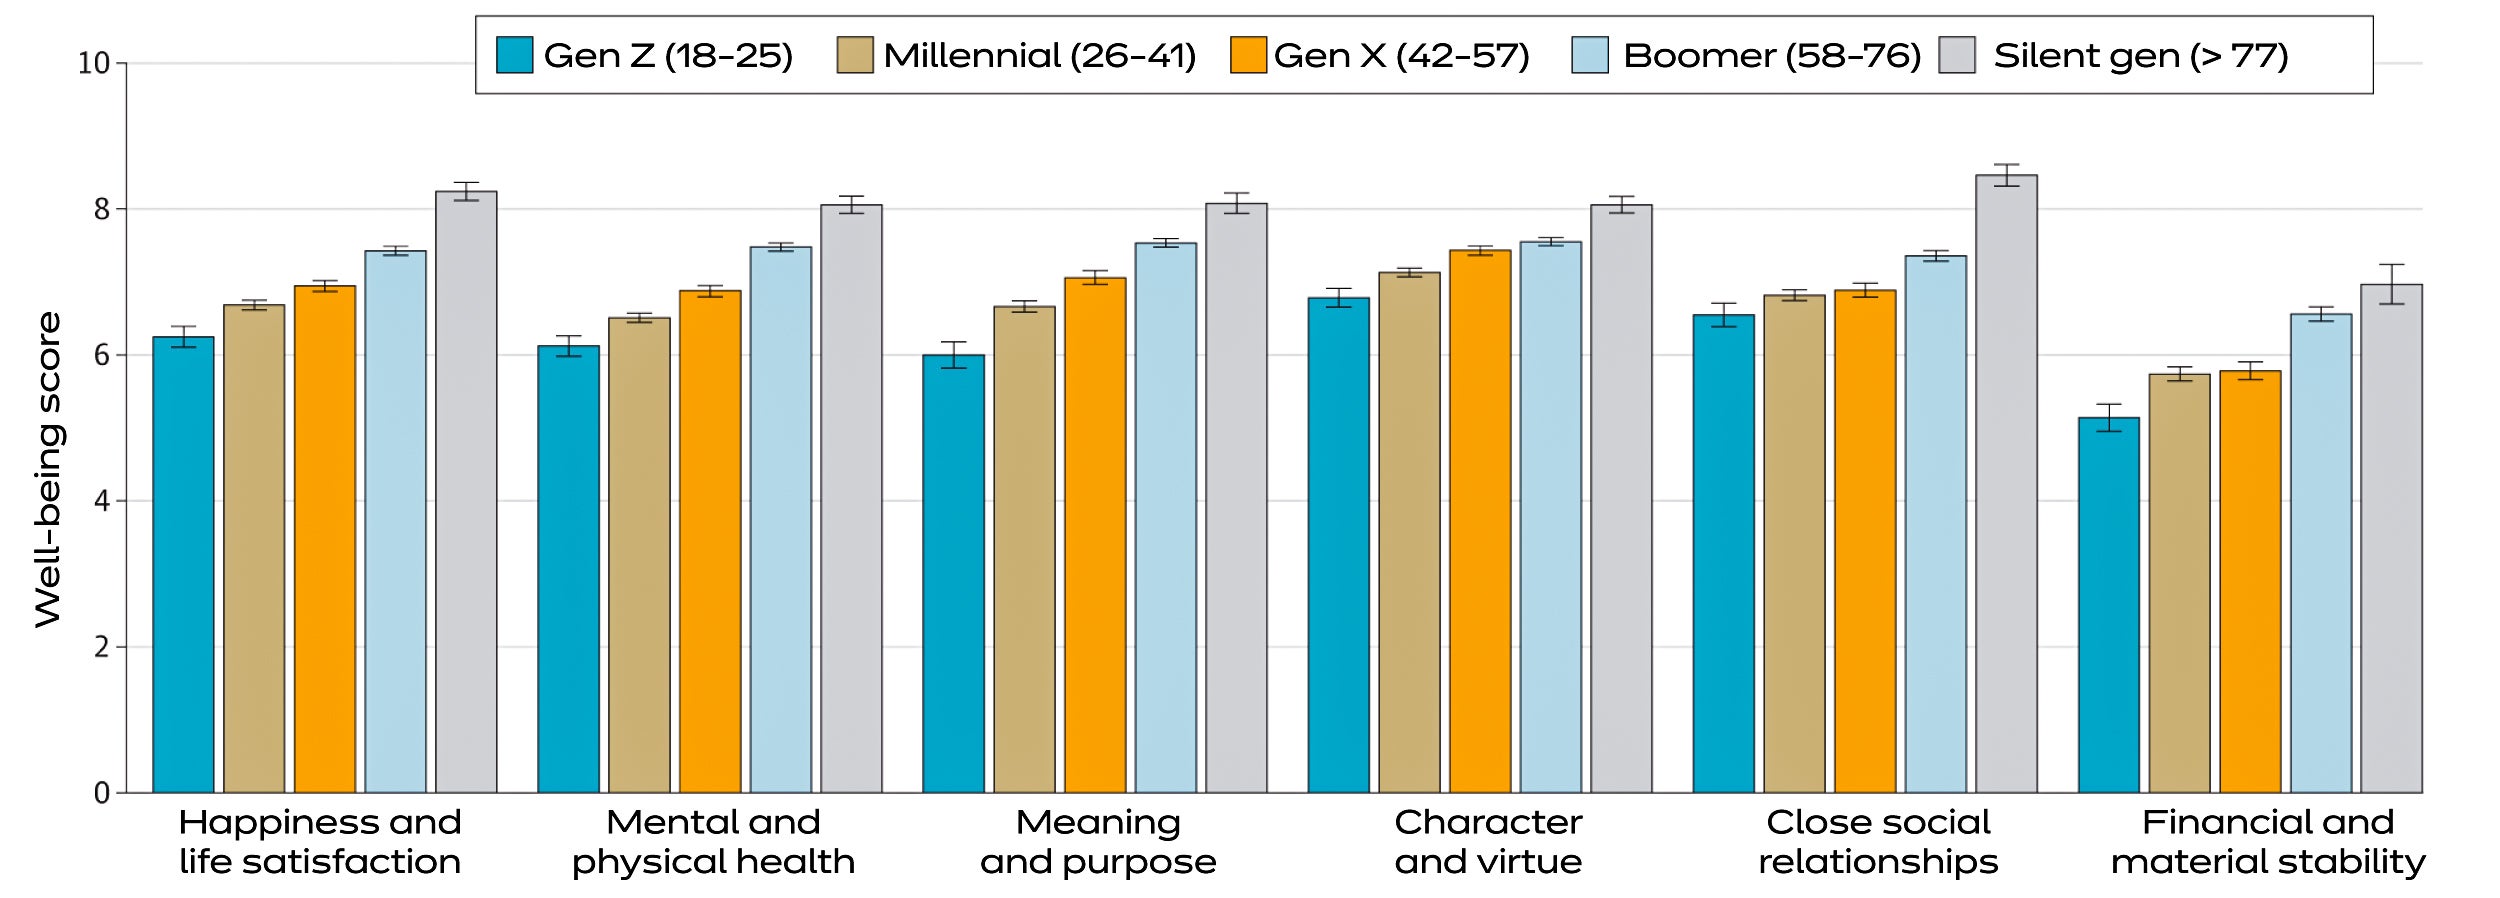 Bar graph of results from January 2022 survey shows well-being in six categories declining across five generations: Silent, Boomer, Gen X, Millenial, Gen Z. The categories are "happiness and life satisfaction"; "mental and physical health"; "meaning and purpose"; "character and virtue"; "close social relationships"; and "financial and material stability."